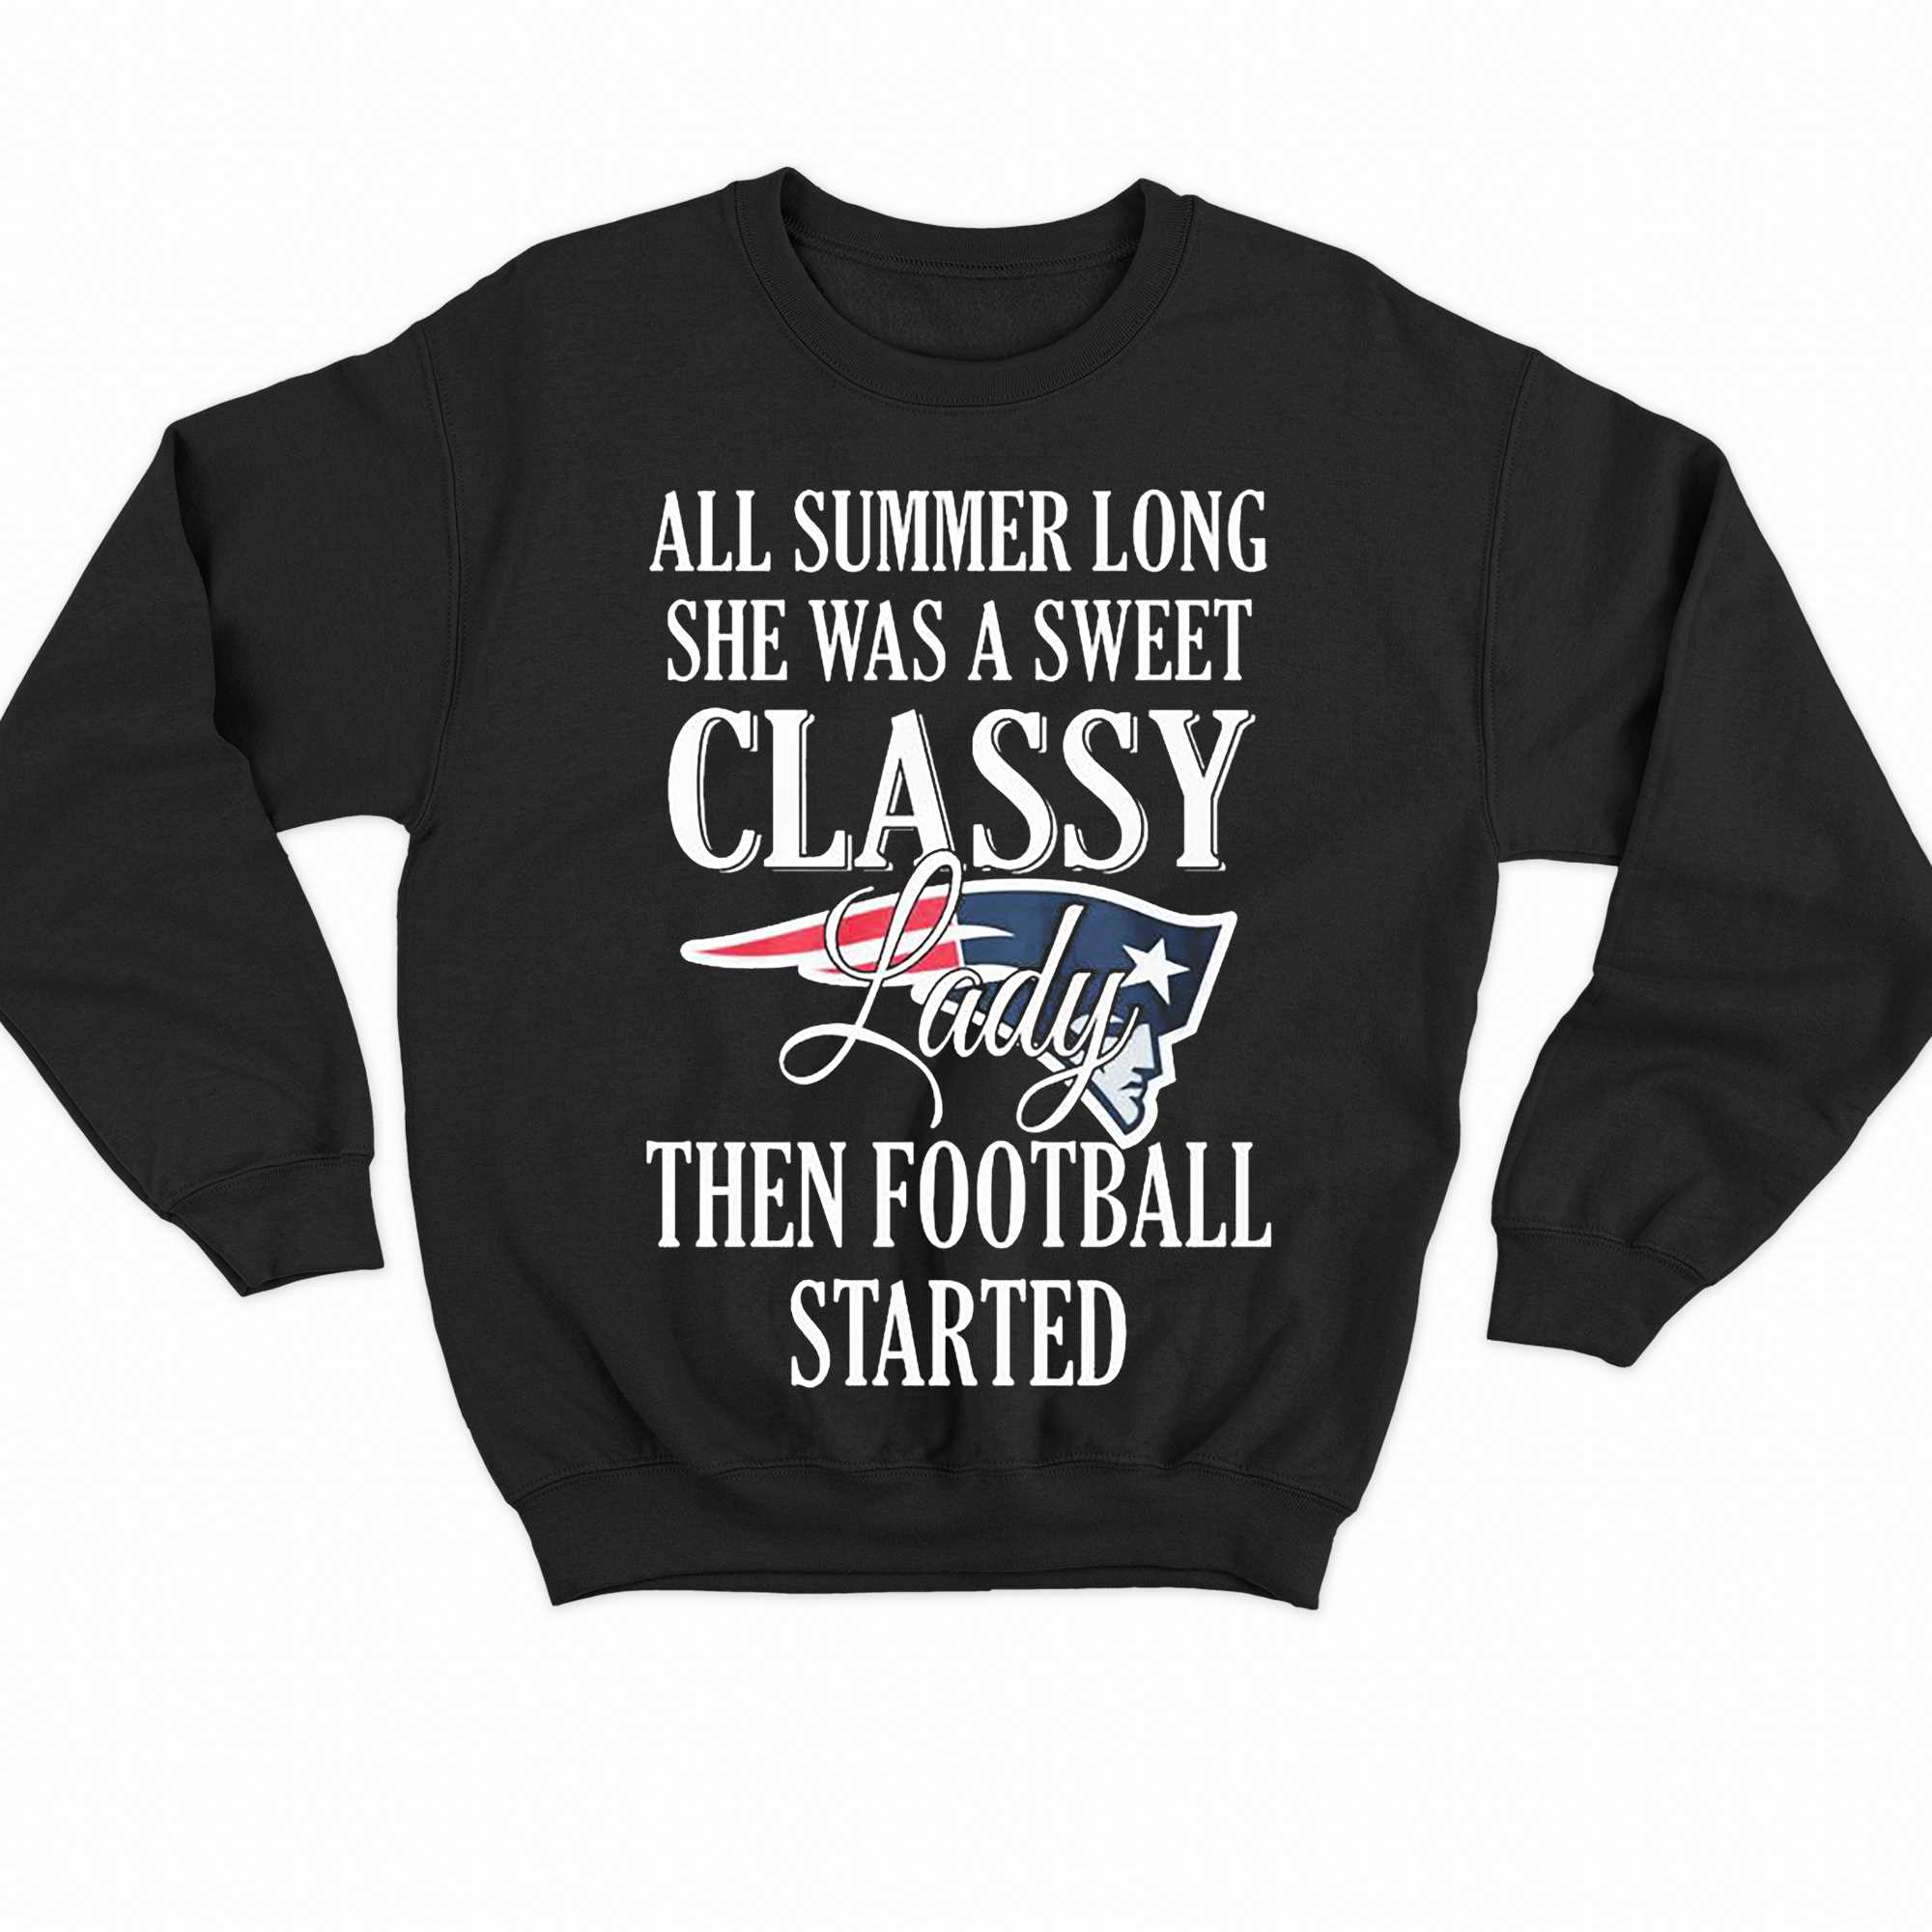 New England Patriots All Summer Long She A Sweet Classy Lady The Football Started Shirt 